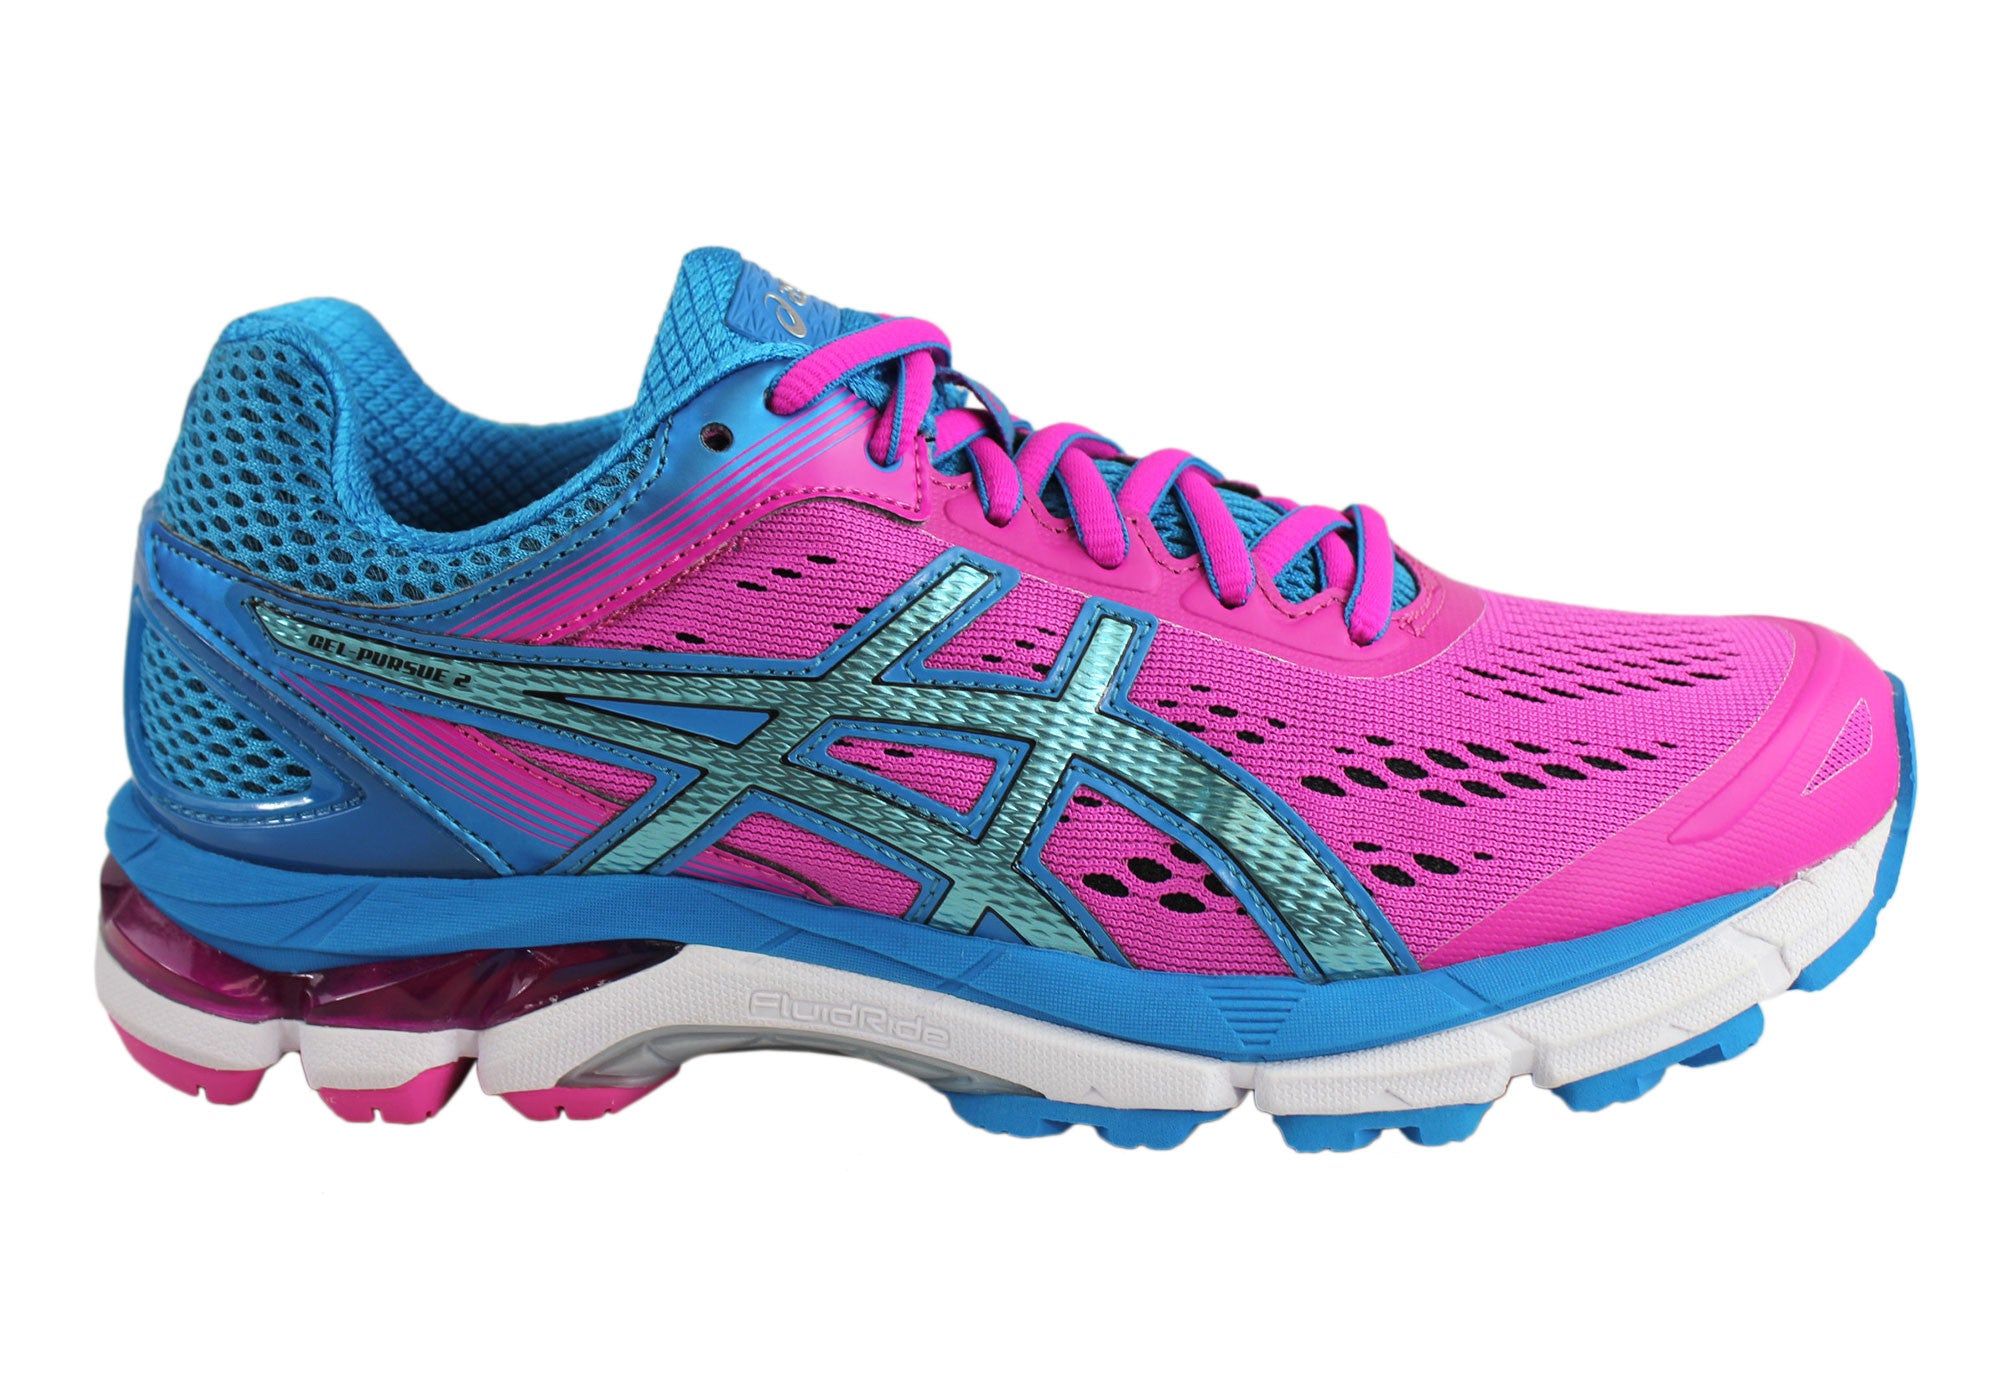 asics womens wide running shoes